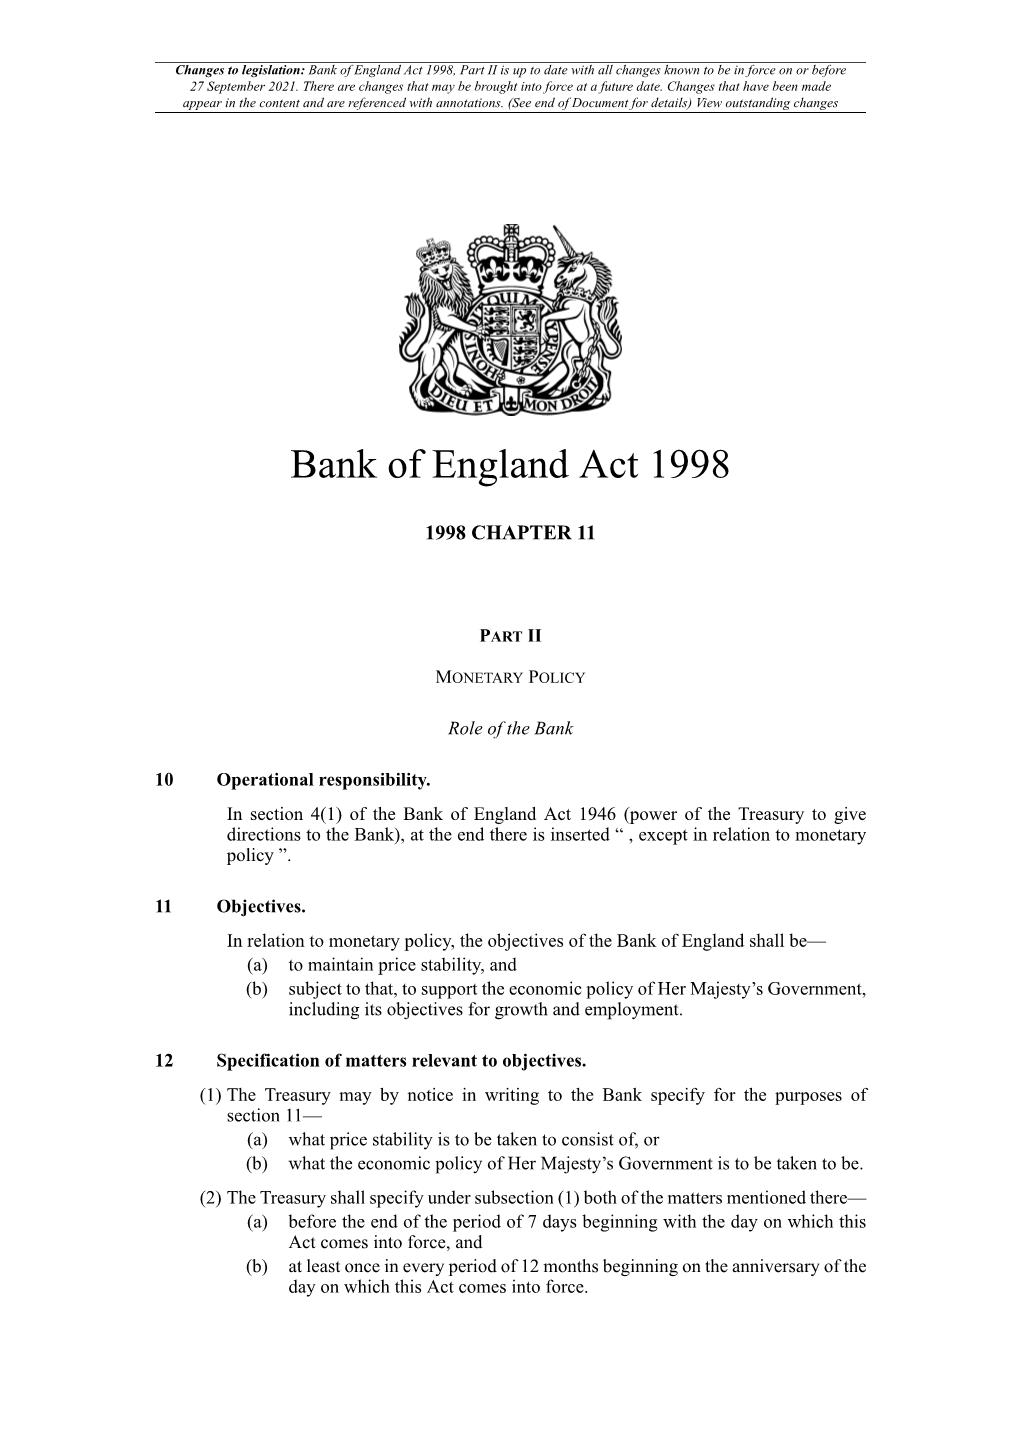 Bank of England Act 1998, Part II Is up to Date with All Changes Known to Be in Force on Or Before 27 September 2021